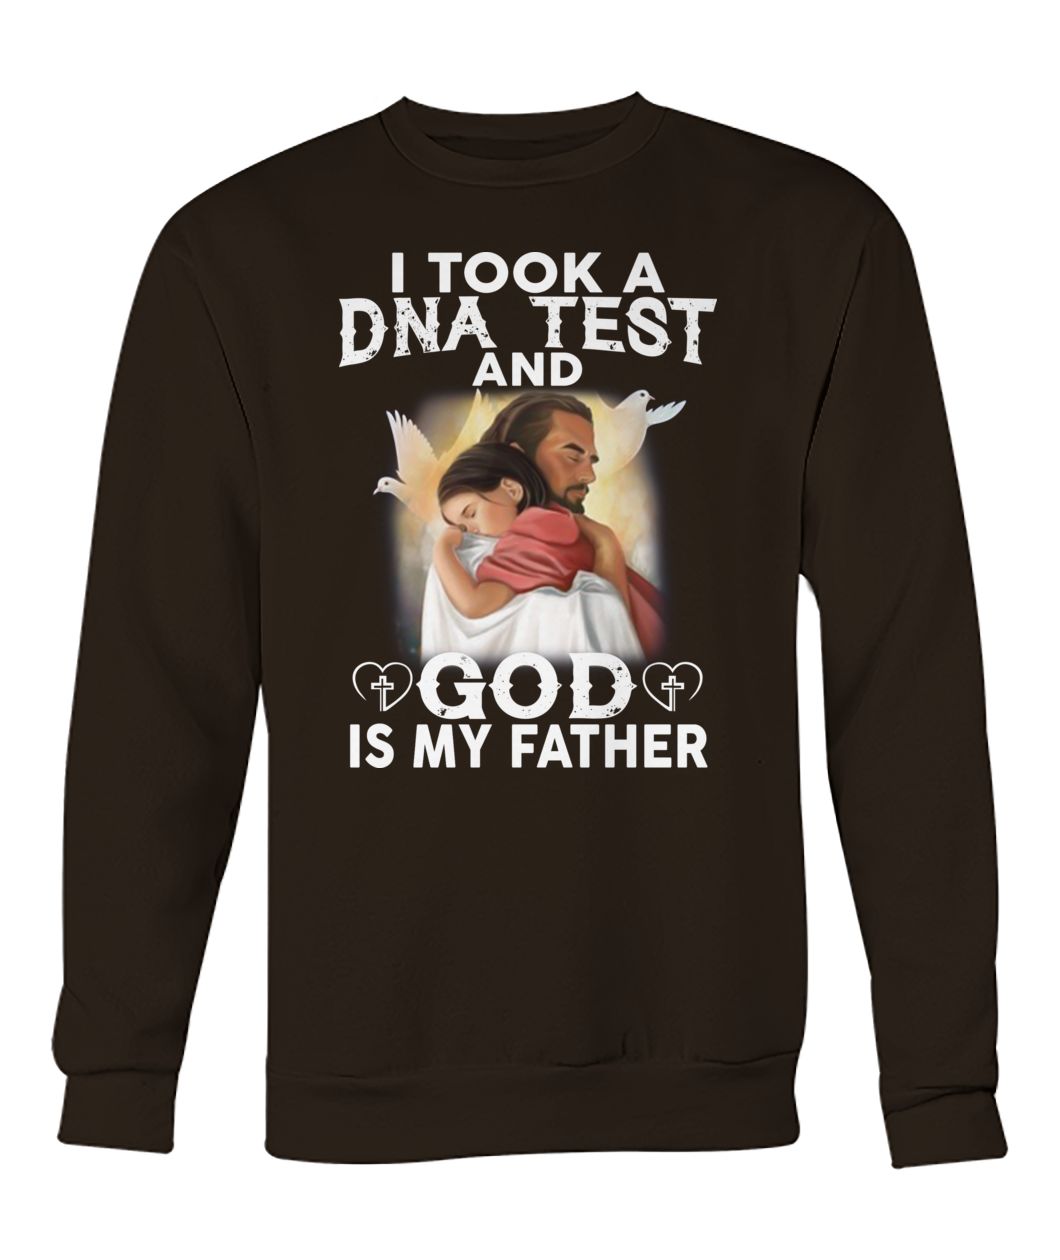 I took a dna test and god is my father crew neck sweatshirt